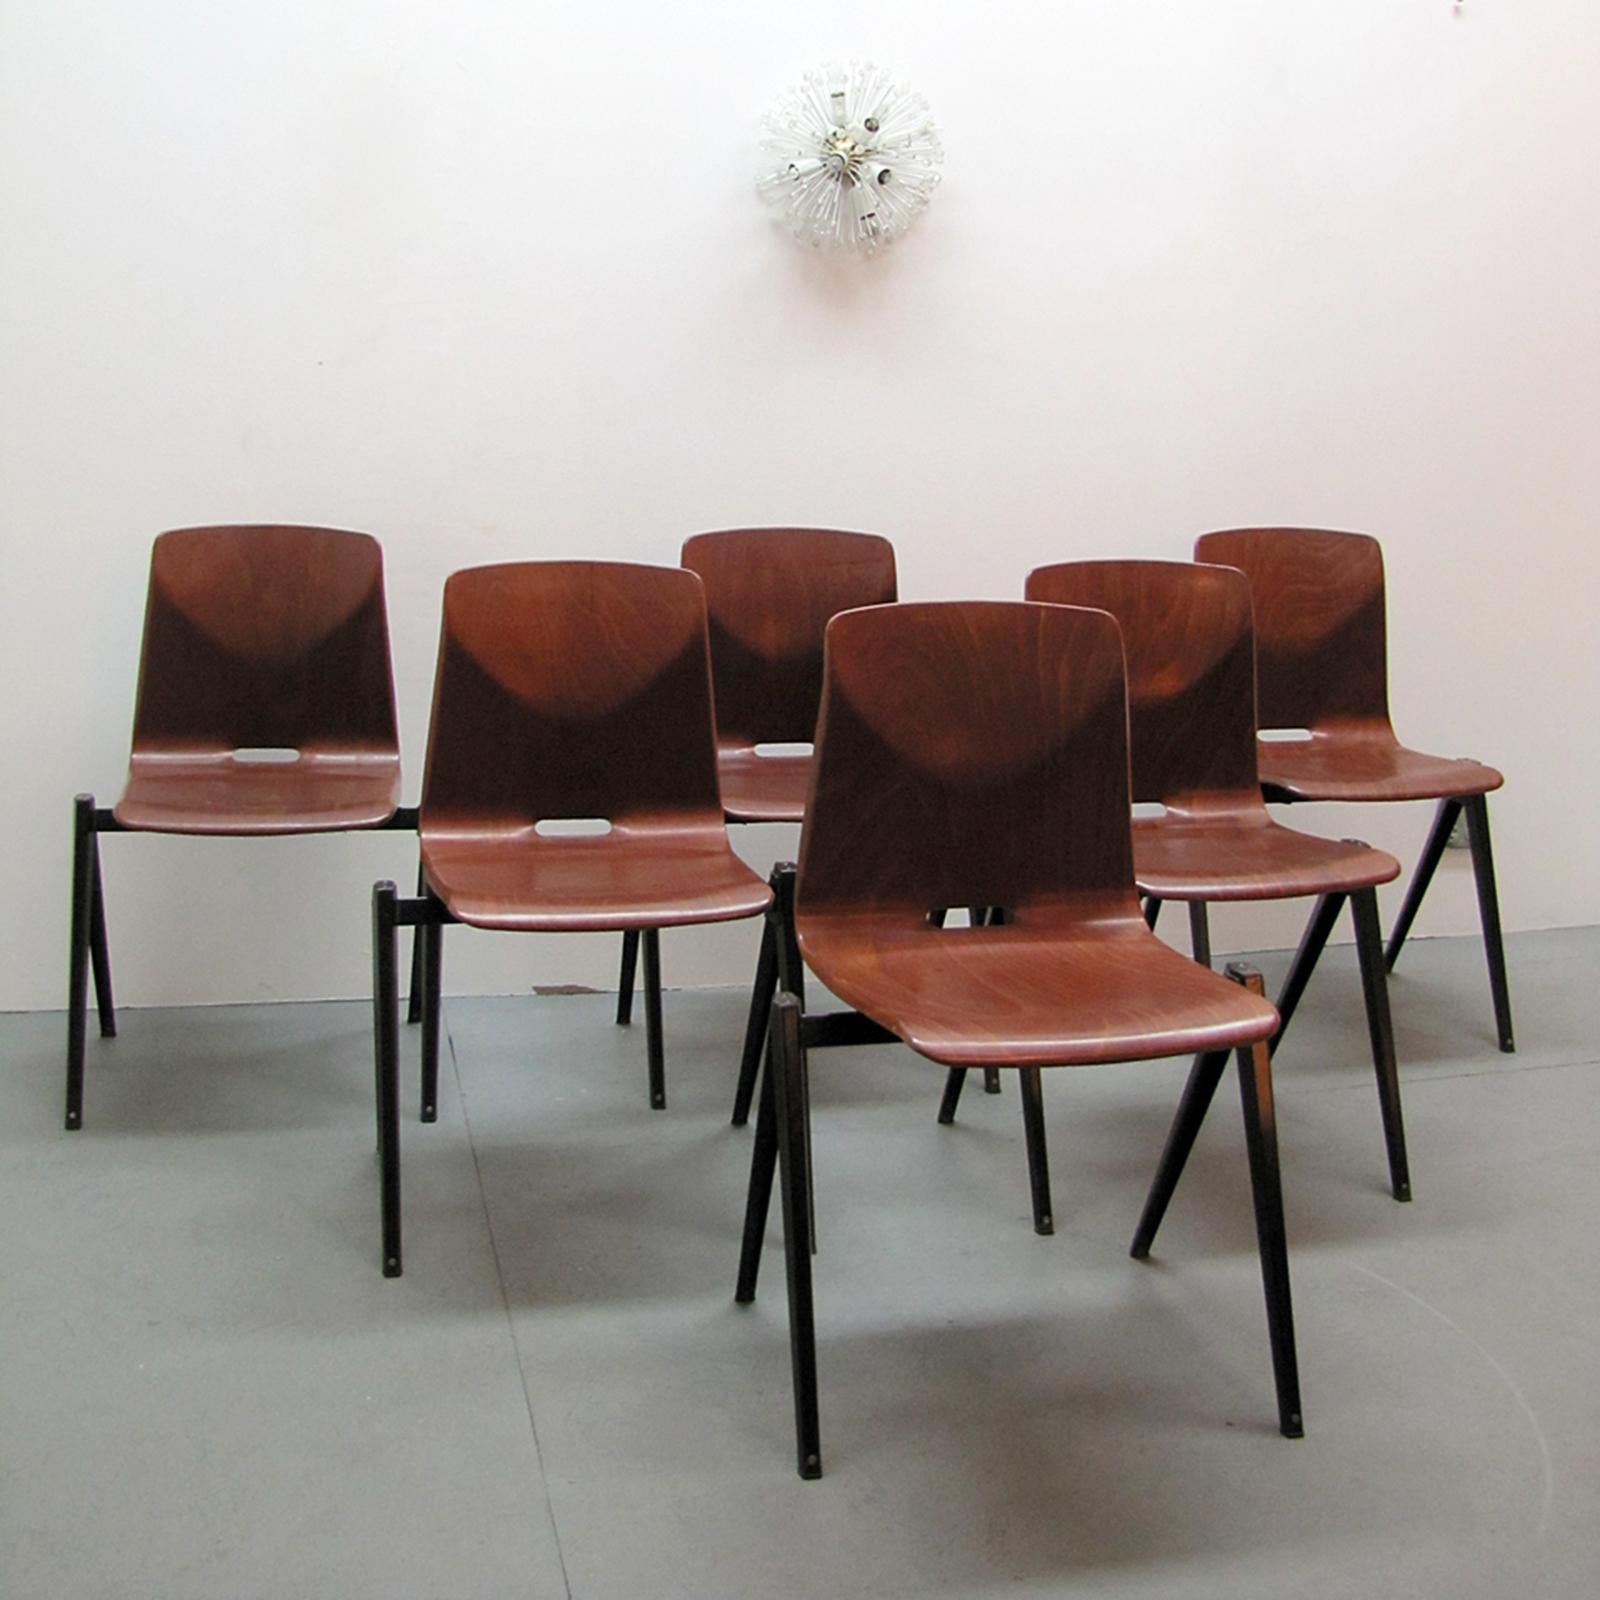 Six Industrial Dining Chairs by Galvanitas, 1960 For Sale 1